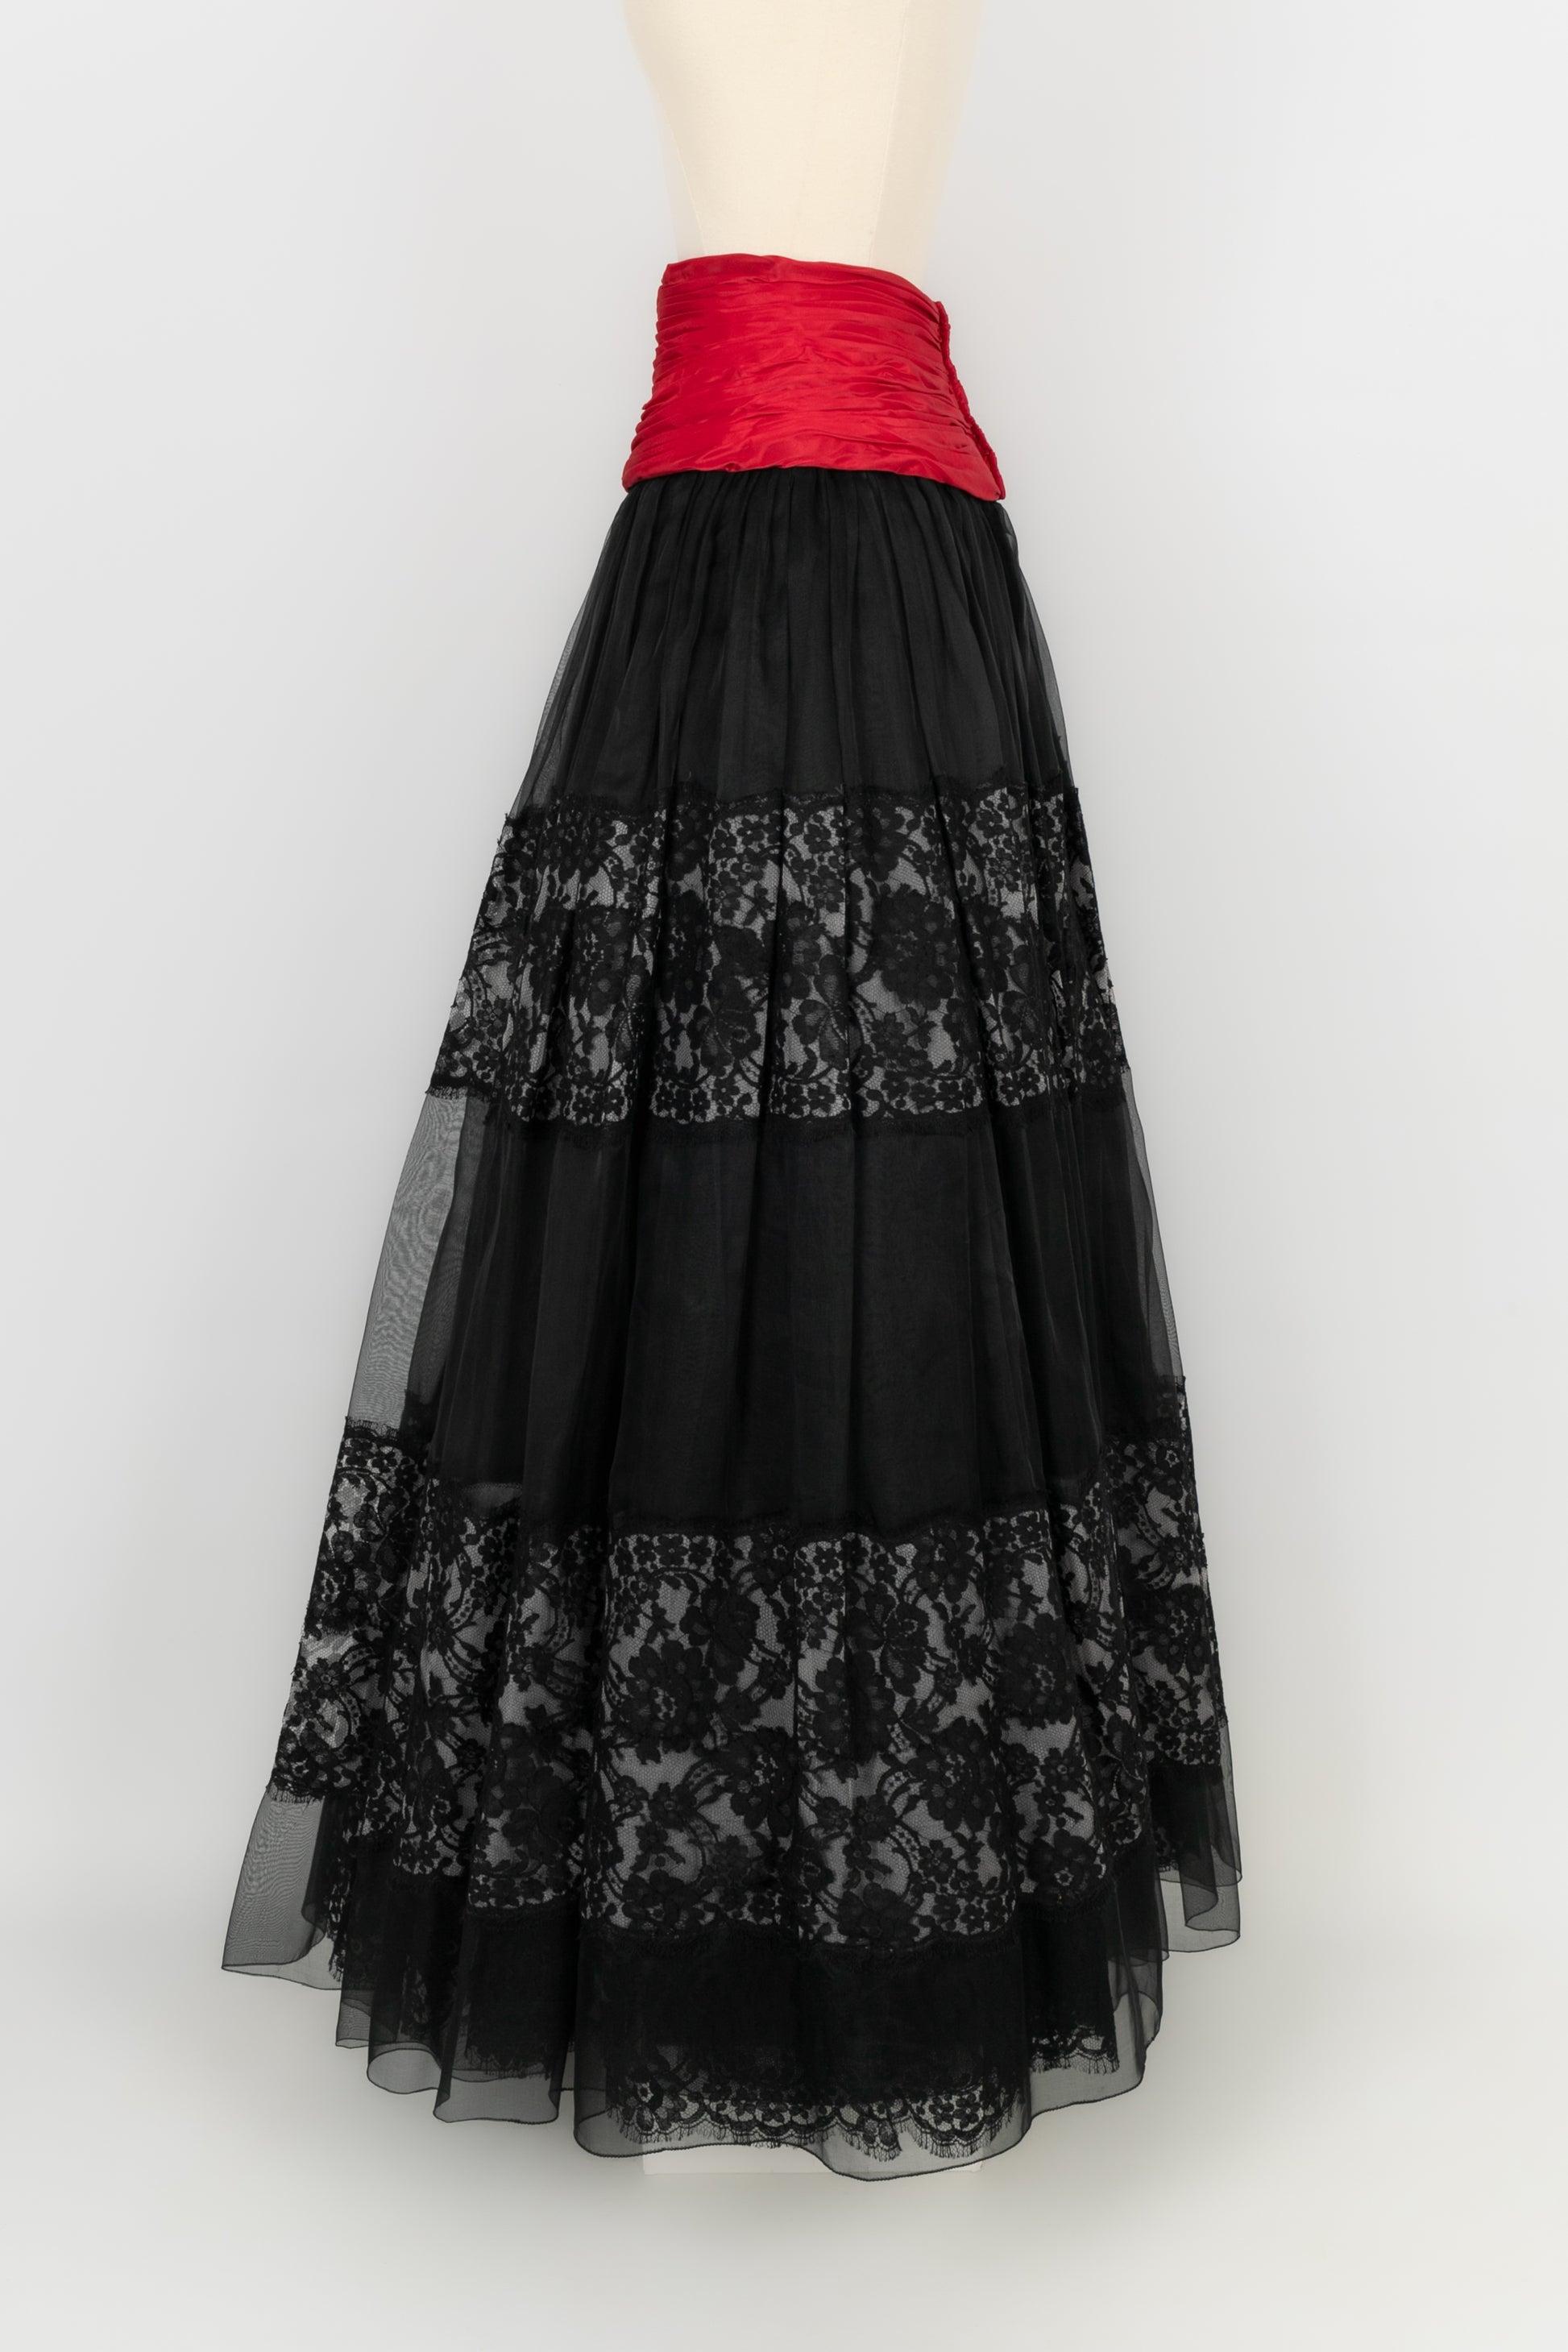 Jean-Louis Scherrer - (Made in France) Haute Couture silk, lace, and taffeta maxi skirt. No size nor composition label, it fits a 36FR.

Additional information:
Condition: Very good condition
Dimensions: Waist: 35 cm
Length: 111 cm

Seller